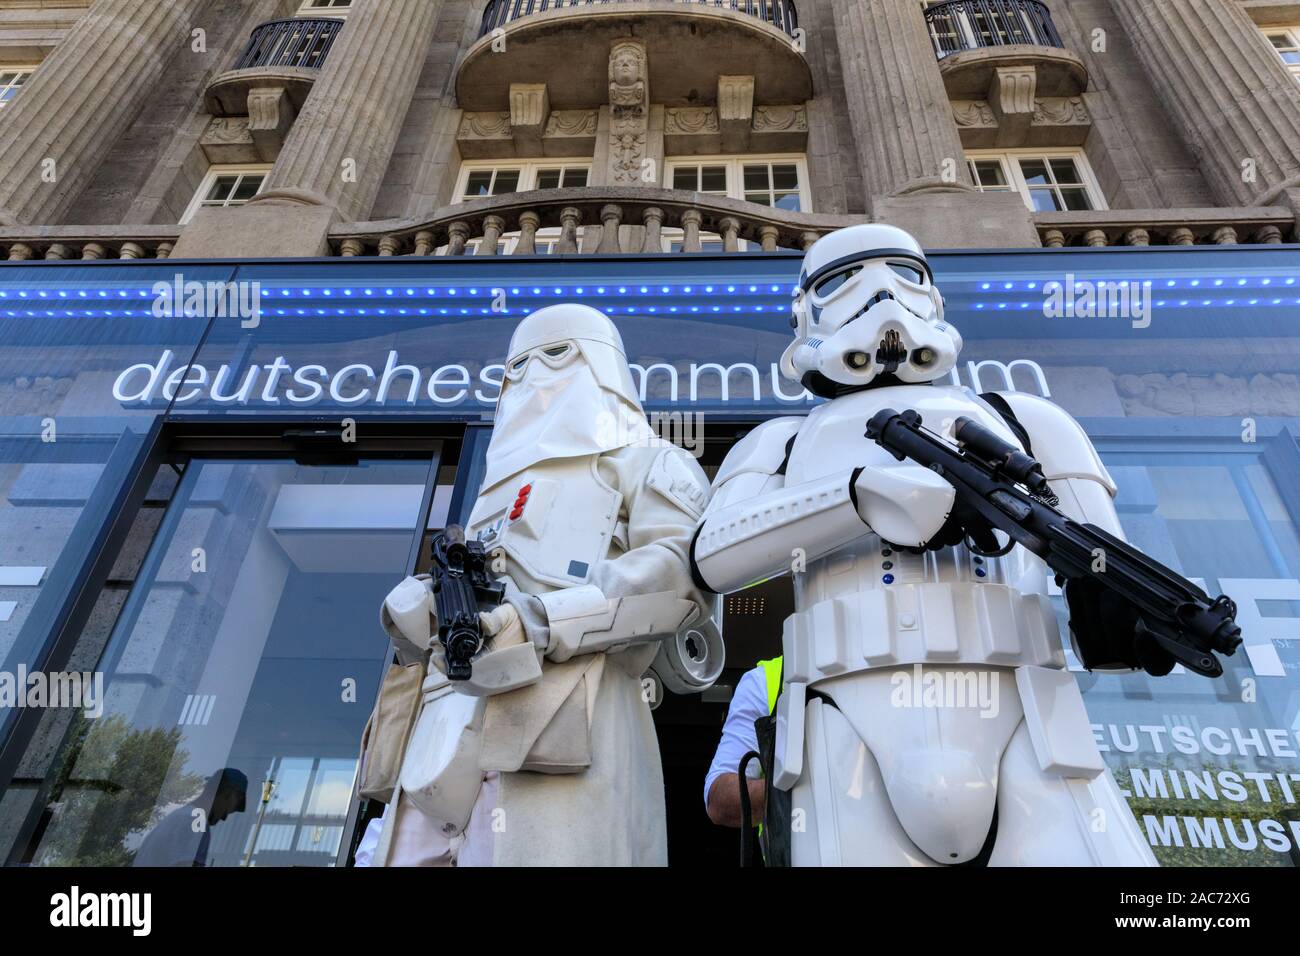 Storm trooper Star Wars movie characters pose outside Deutusches Film Museum in Frankfurt am Main, Germany Stock Photo